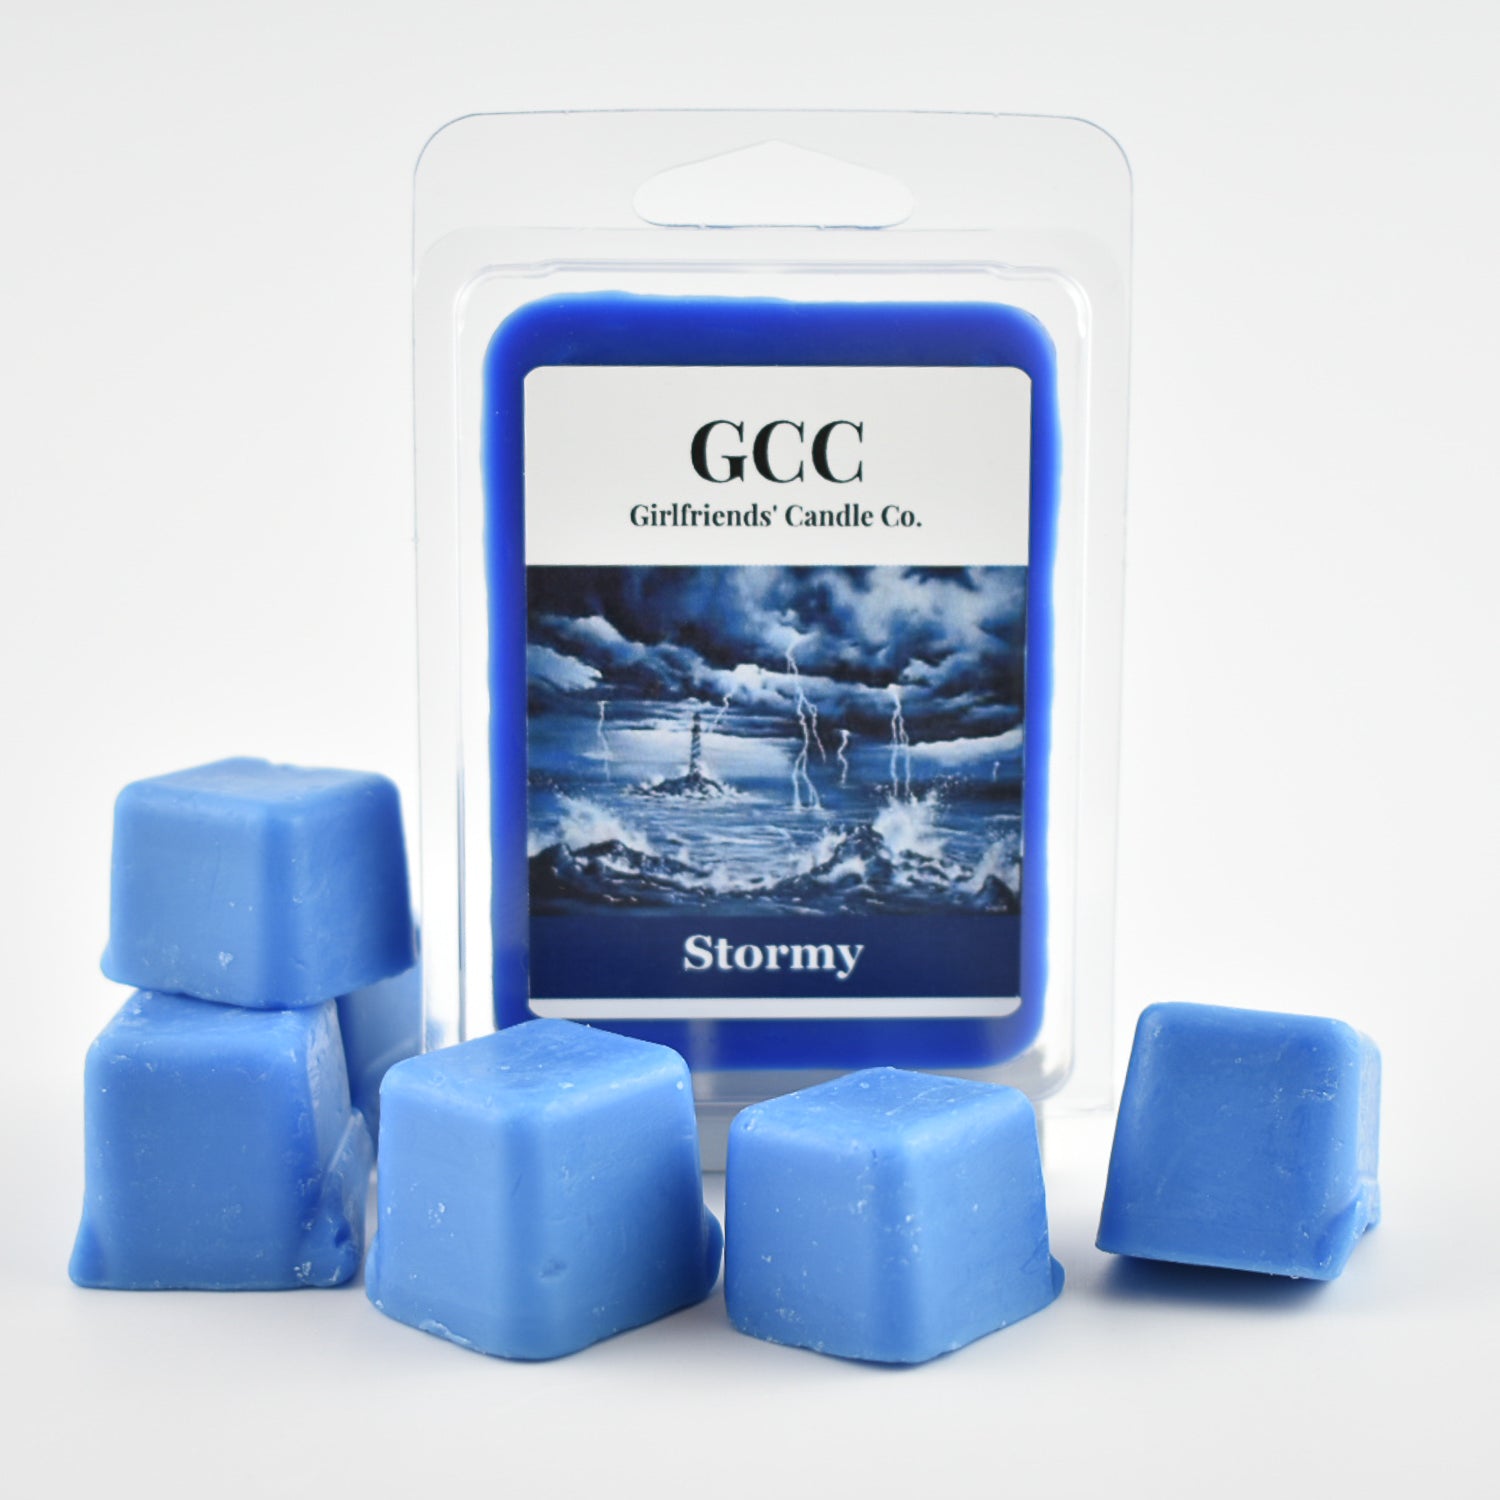 Stormy Scented Wax Melt